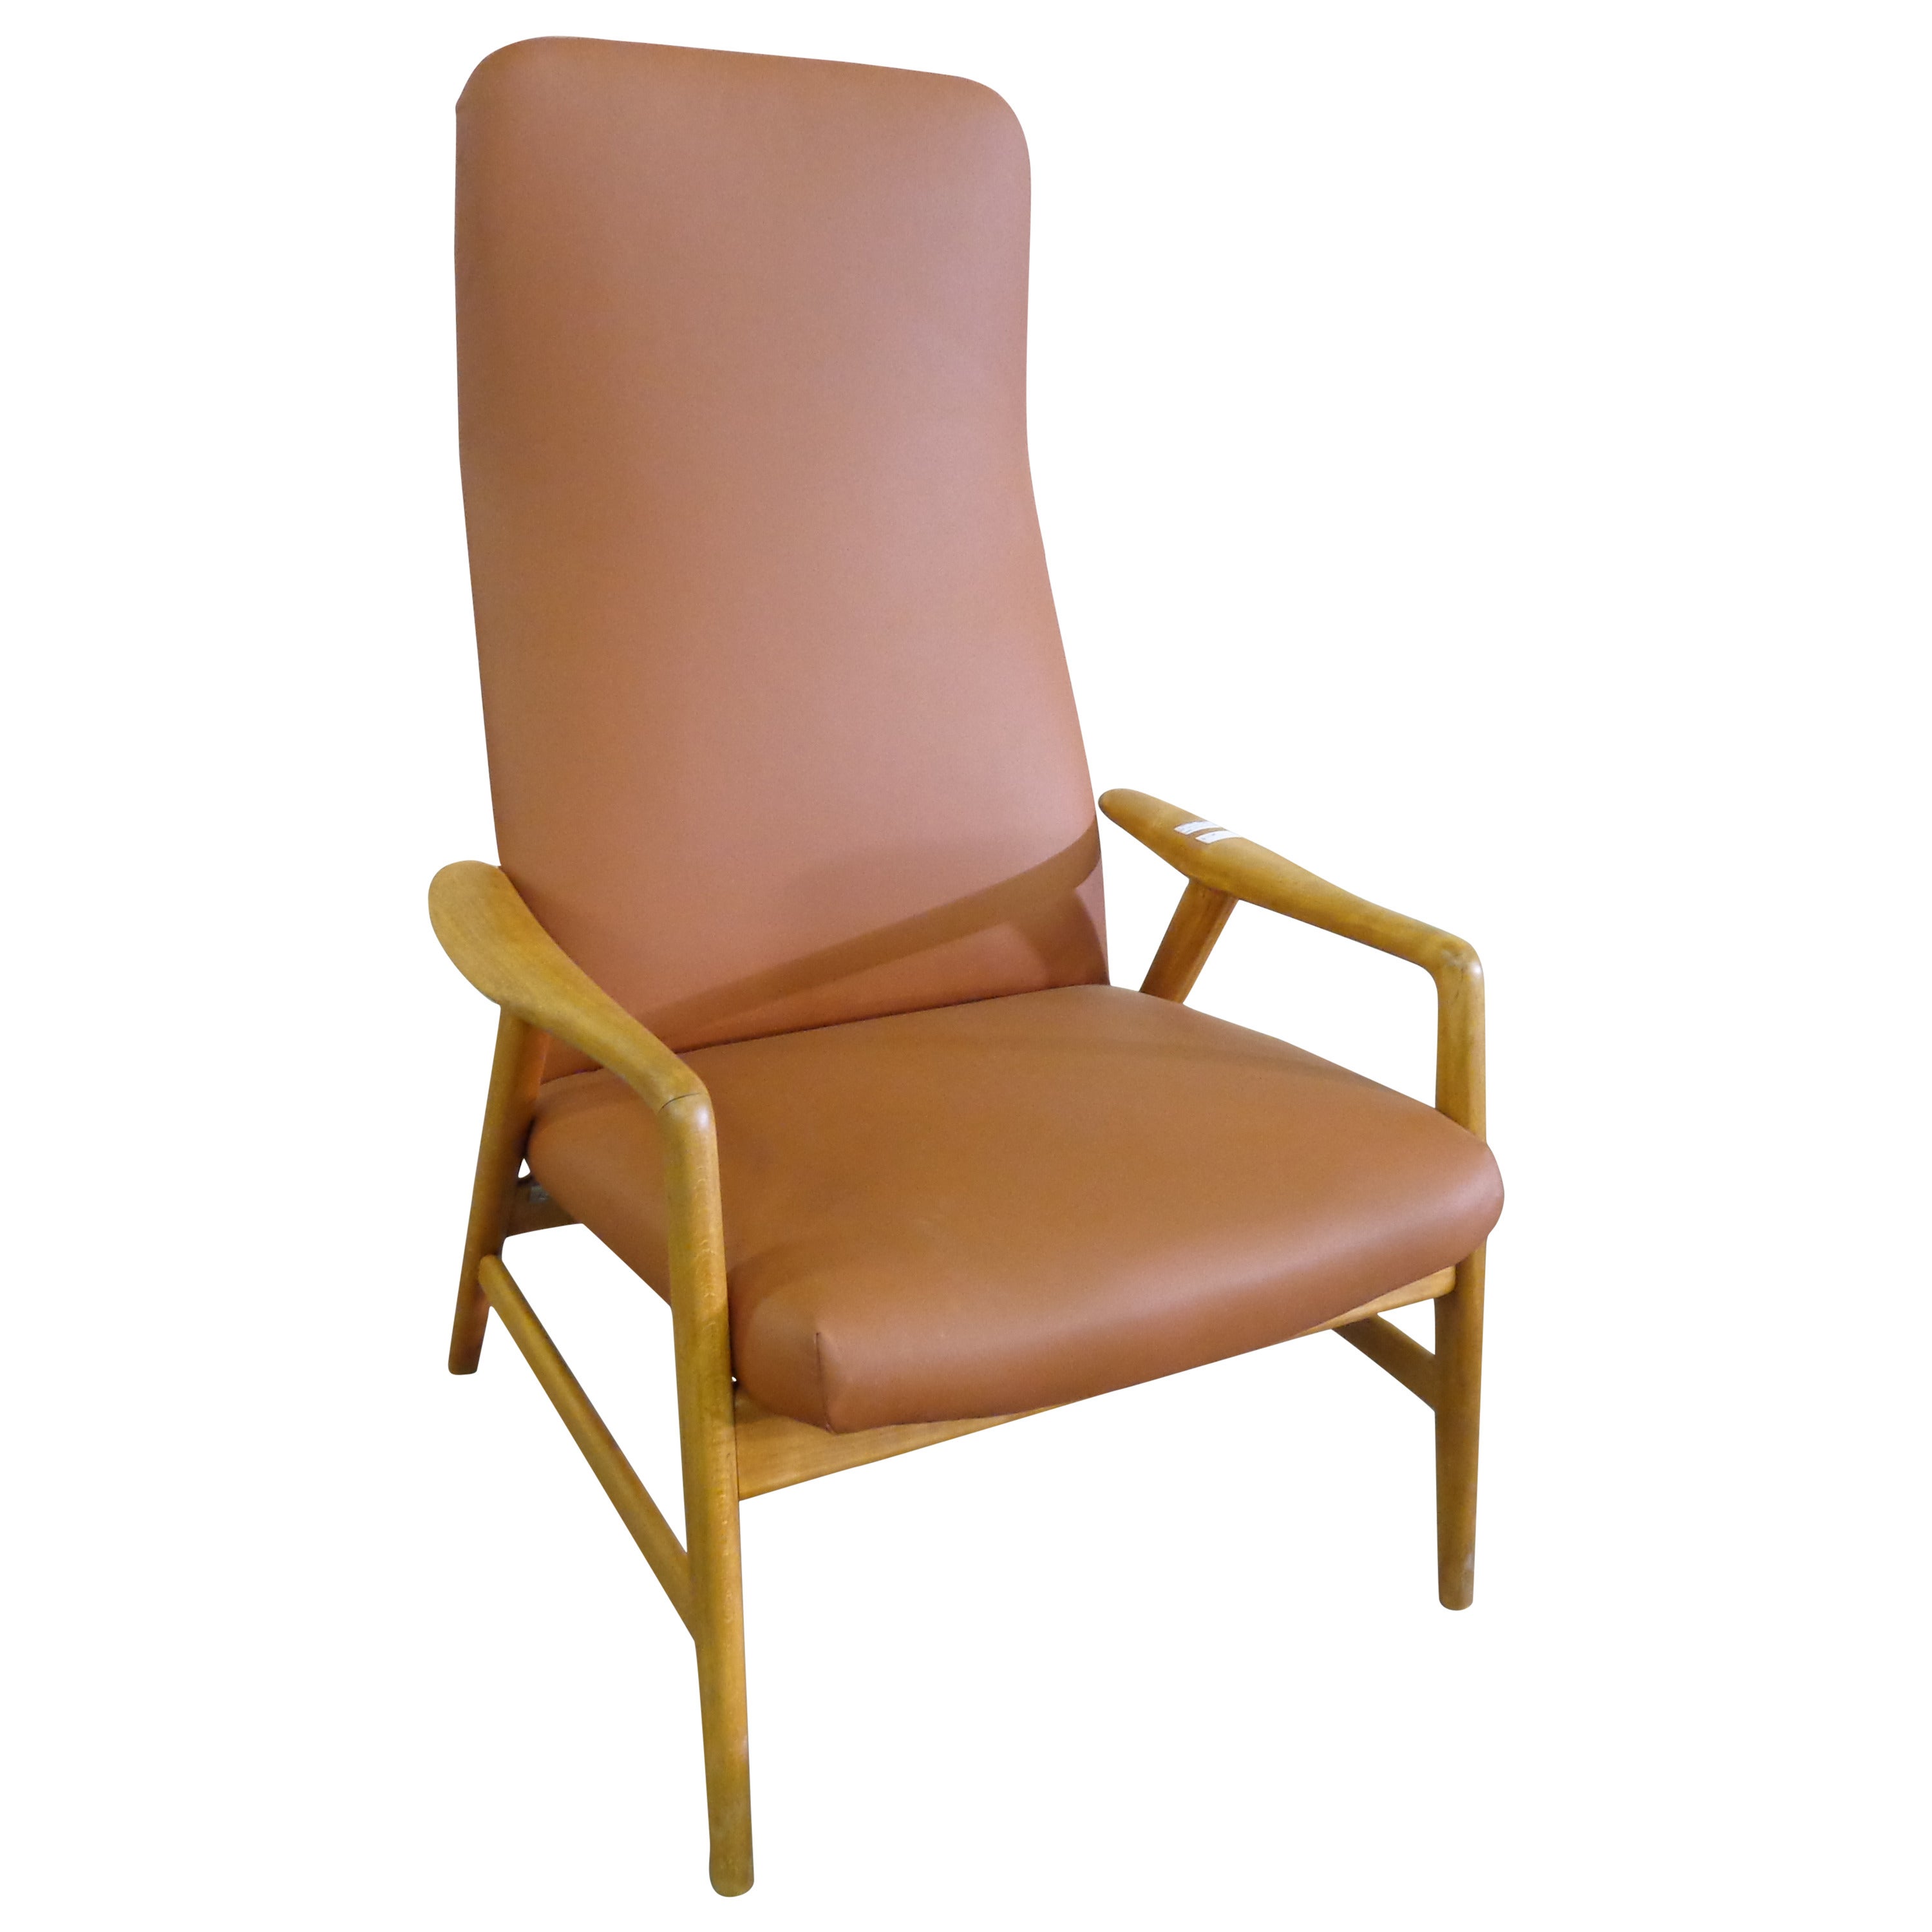 Alf Svensson Armchair with Adjustable Back in Beech and Leather